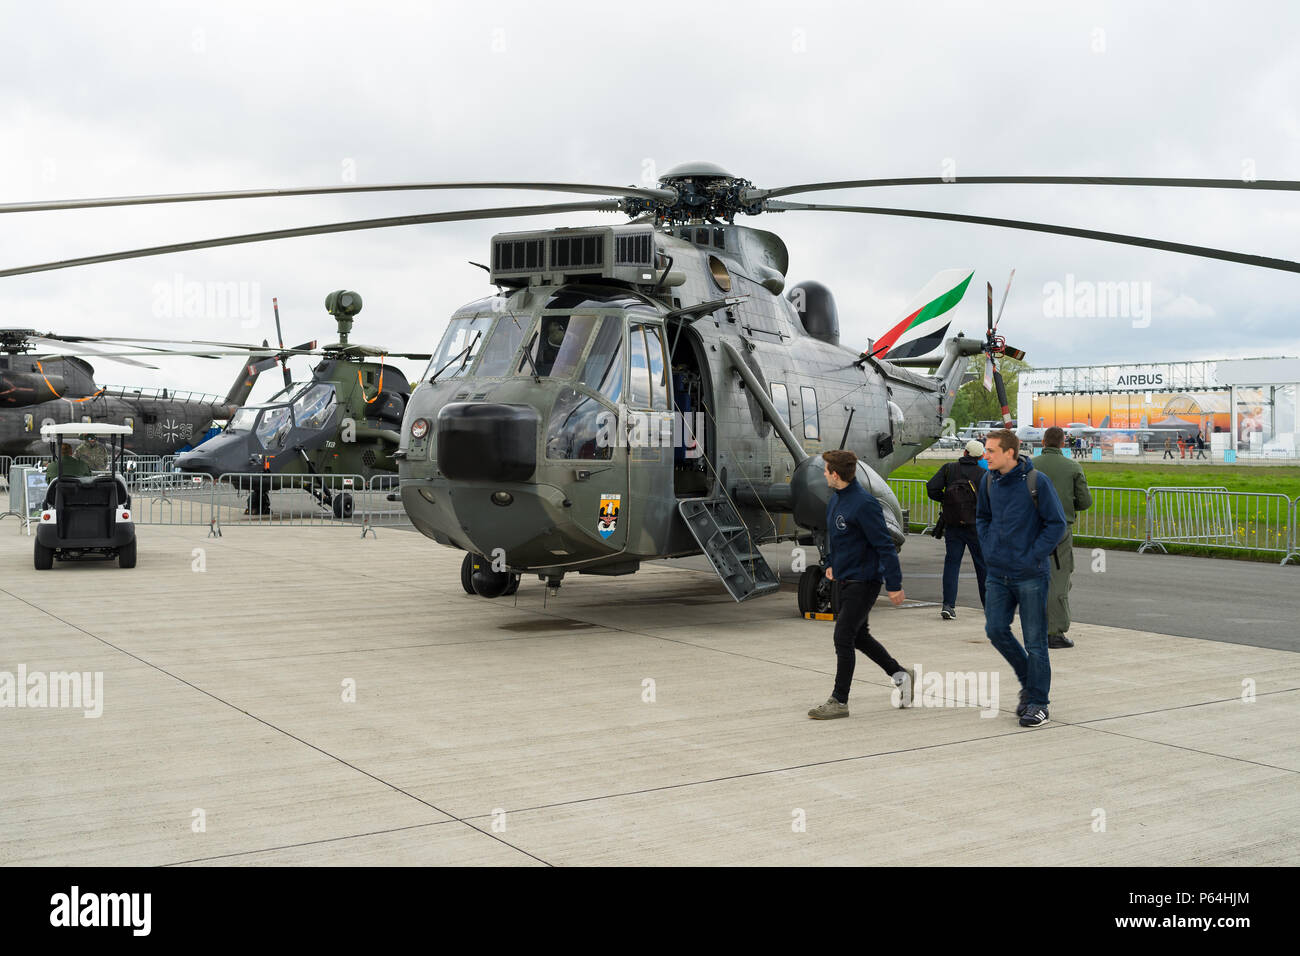 Anti-submarine warfare, search and rescue and utility helicopter Sikorsky SH-3 Sea King. German Navy. Exhibition ILA Berlin Air Show 2018. Stock Photo